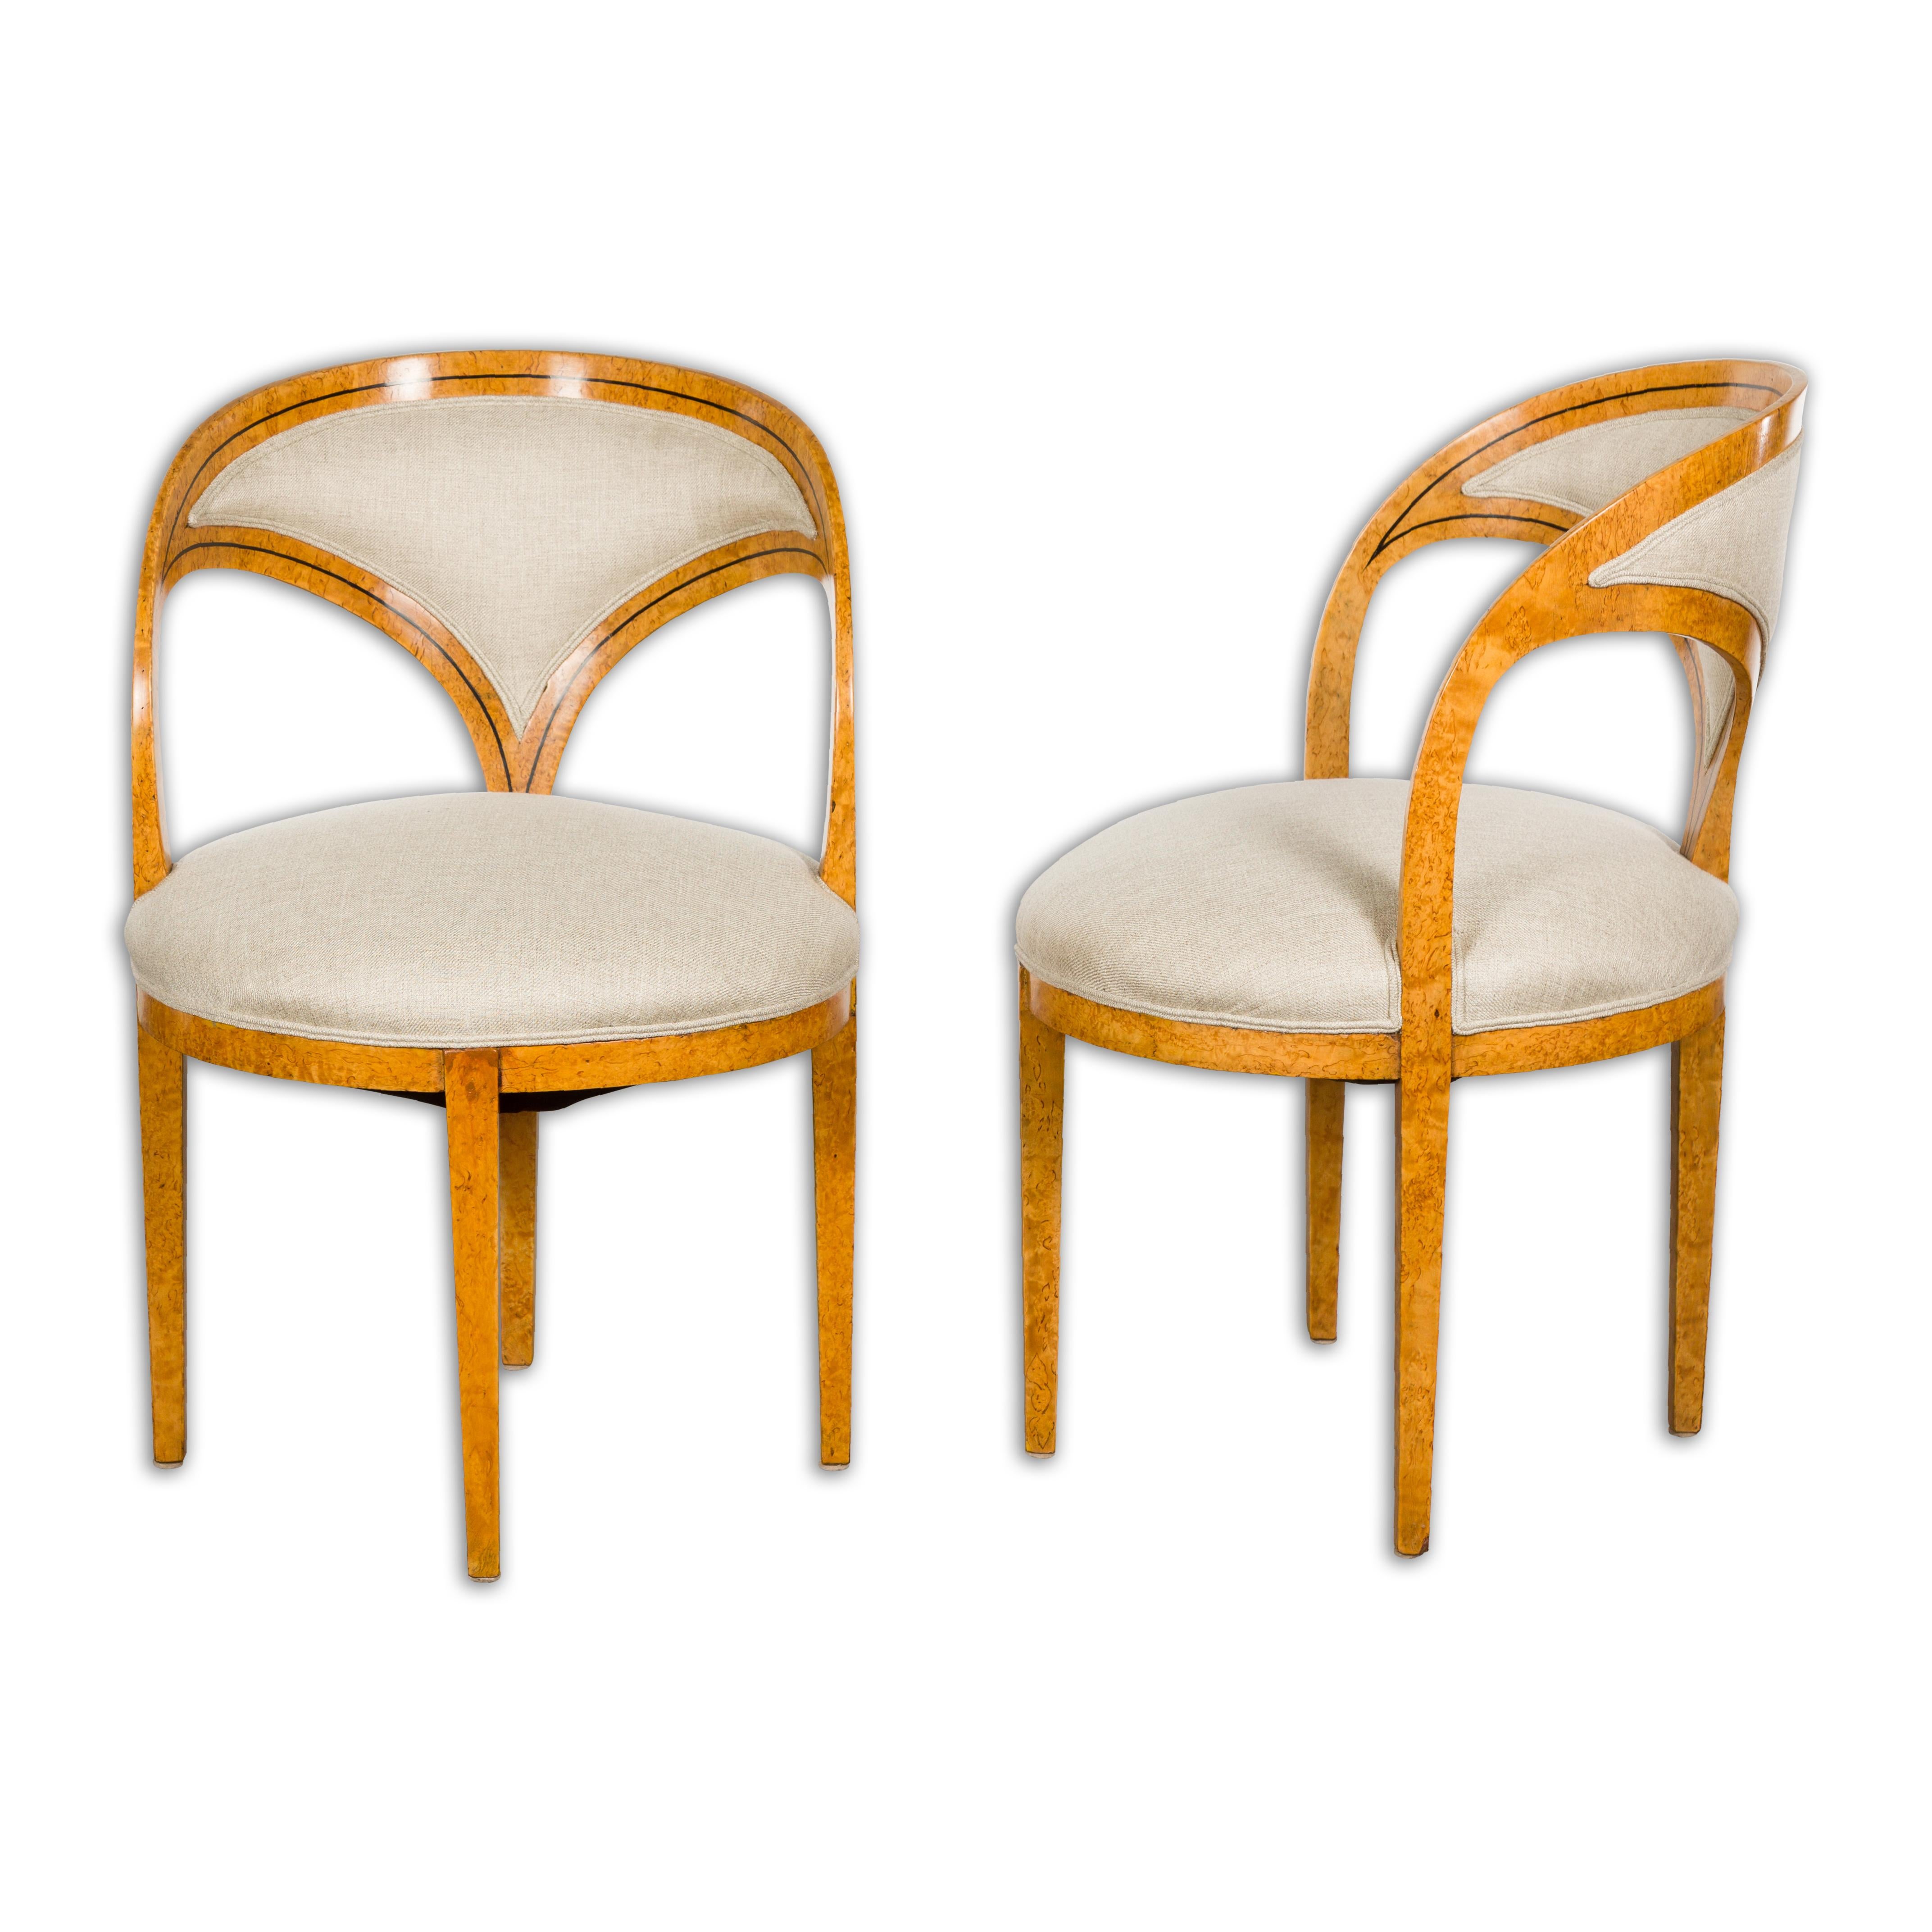 A pair of Biedermeier period Austrian chairs from the 19th century with horseshoe style backs, ebonized banding, four tapering legs and new custom upholstery. This elegant pair of Biedermeier period Austrian chairs, dating from the 19th century,